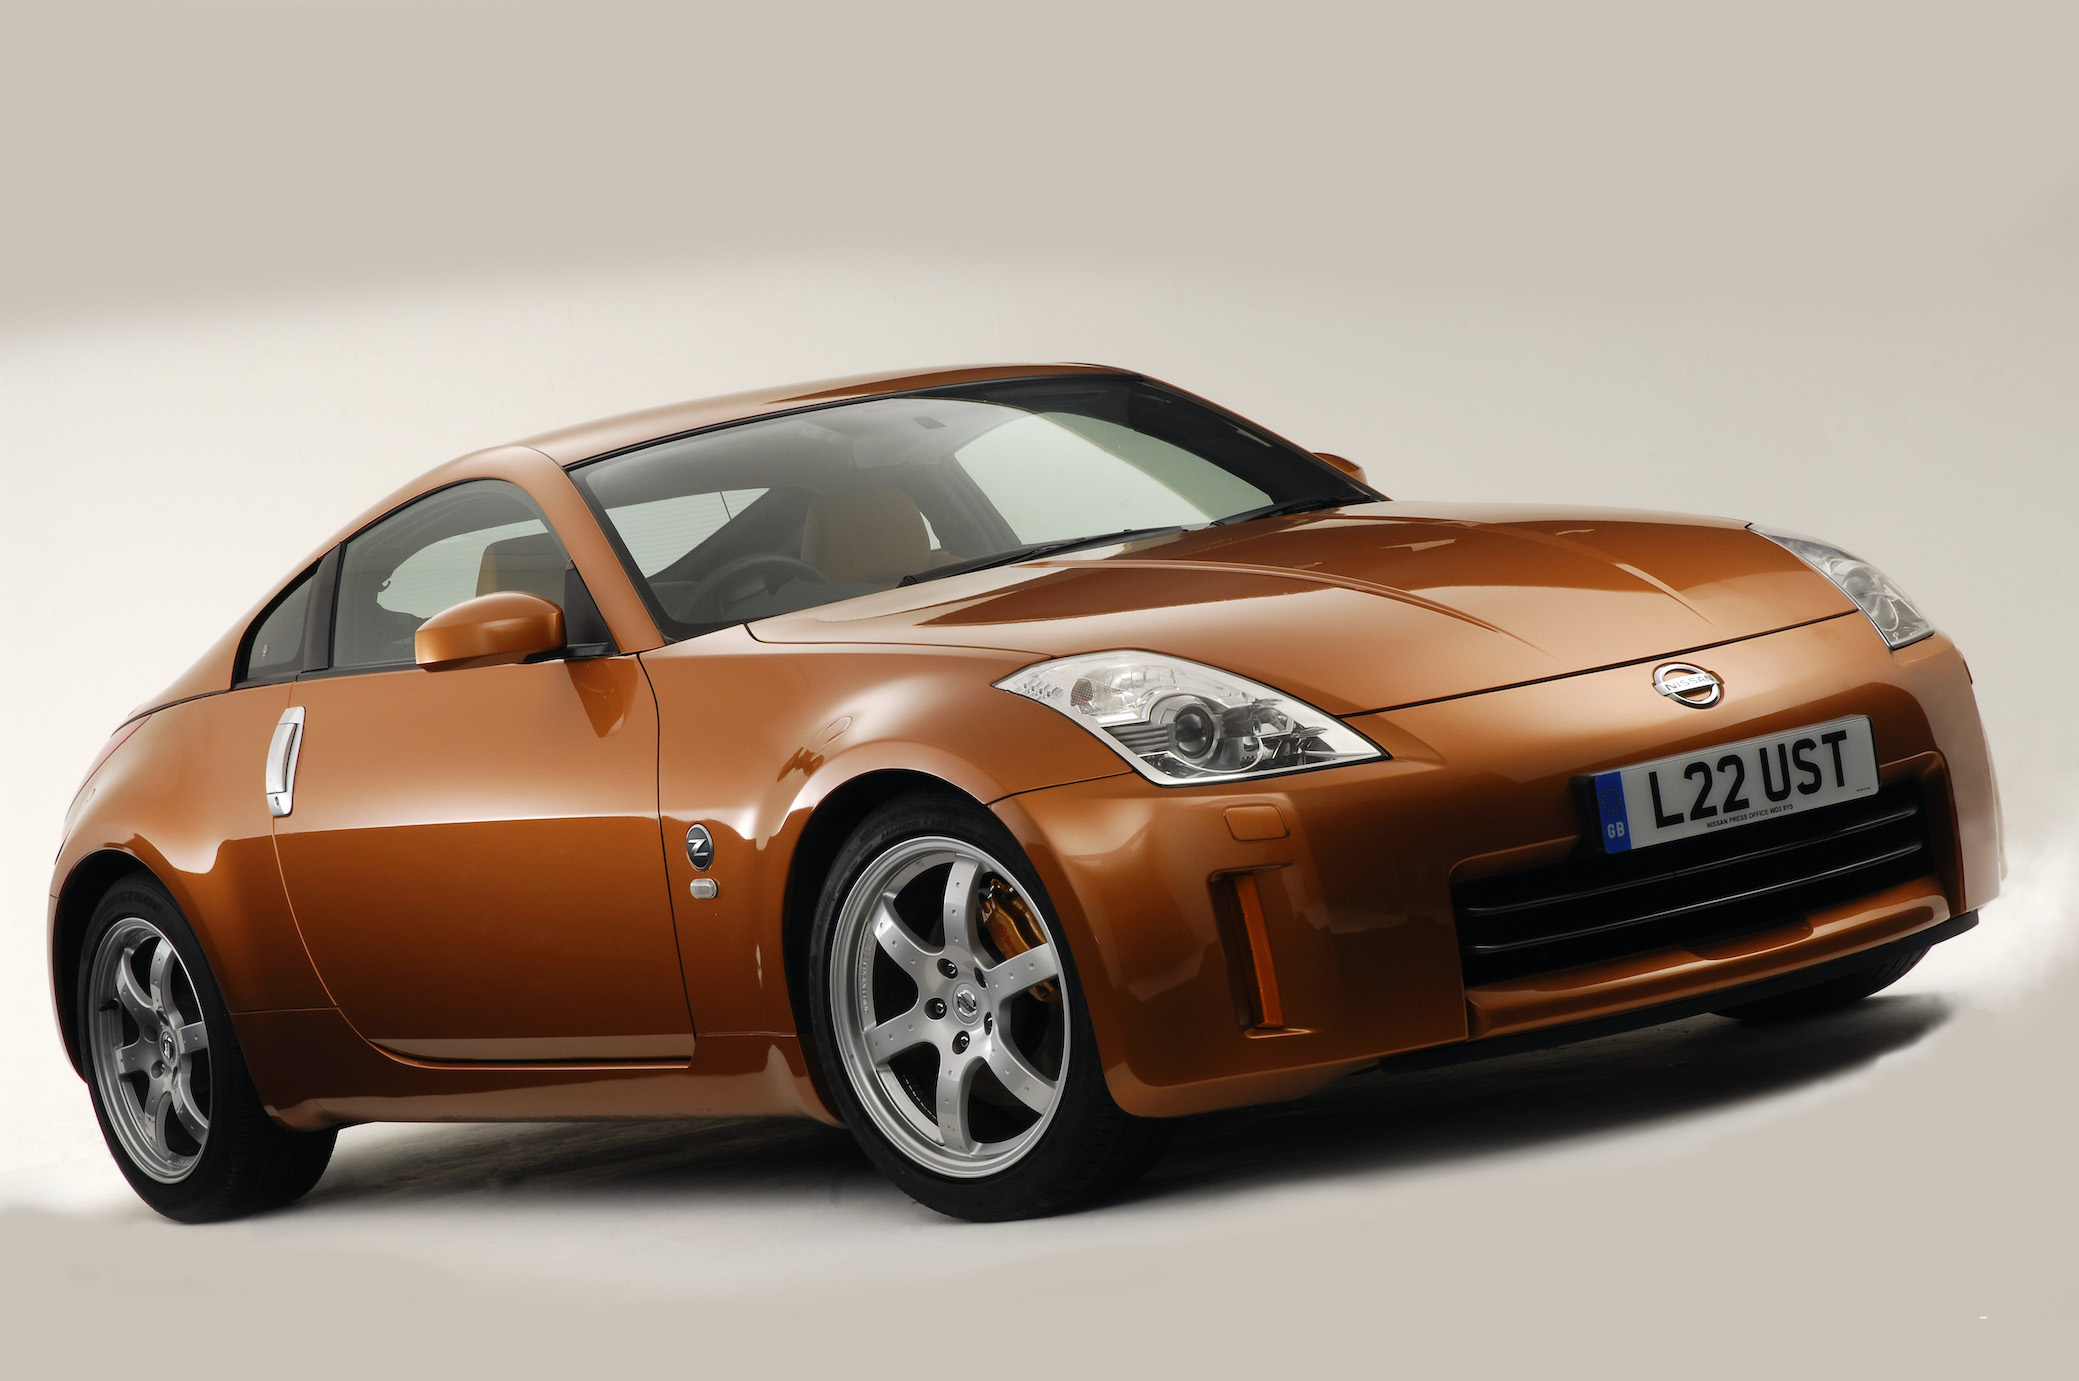 2006 Nissan 350Z in the National Motor Museum